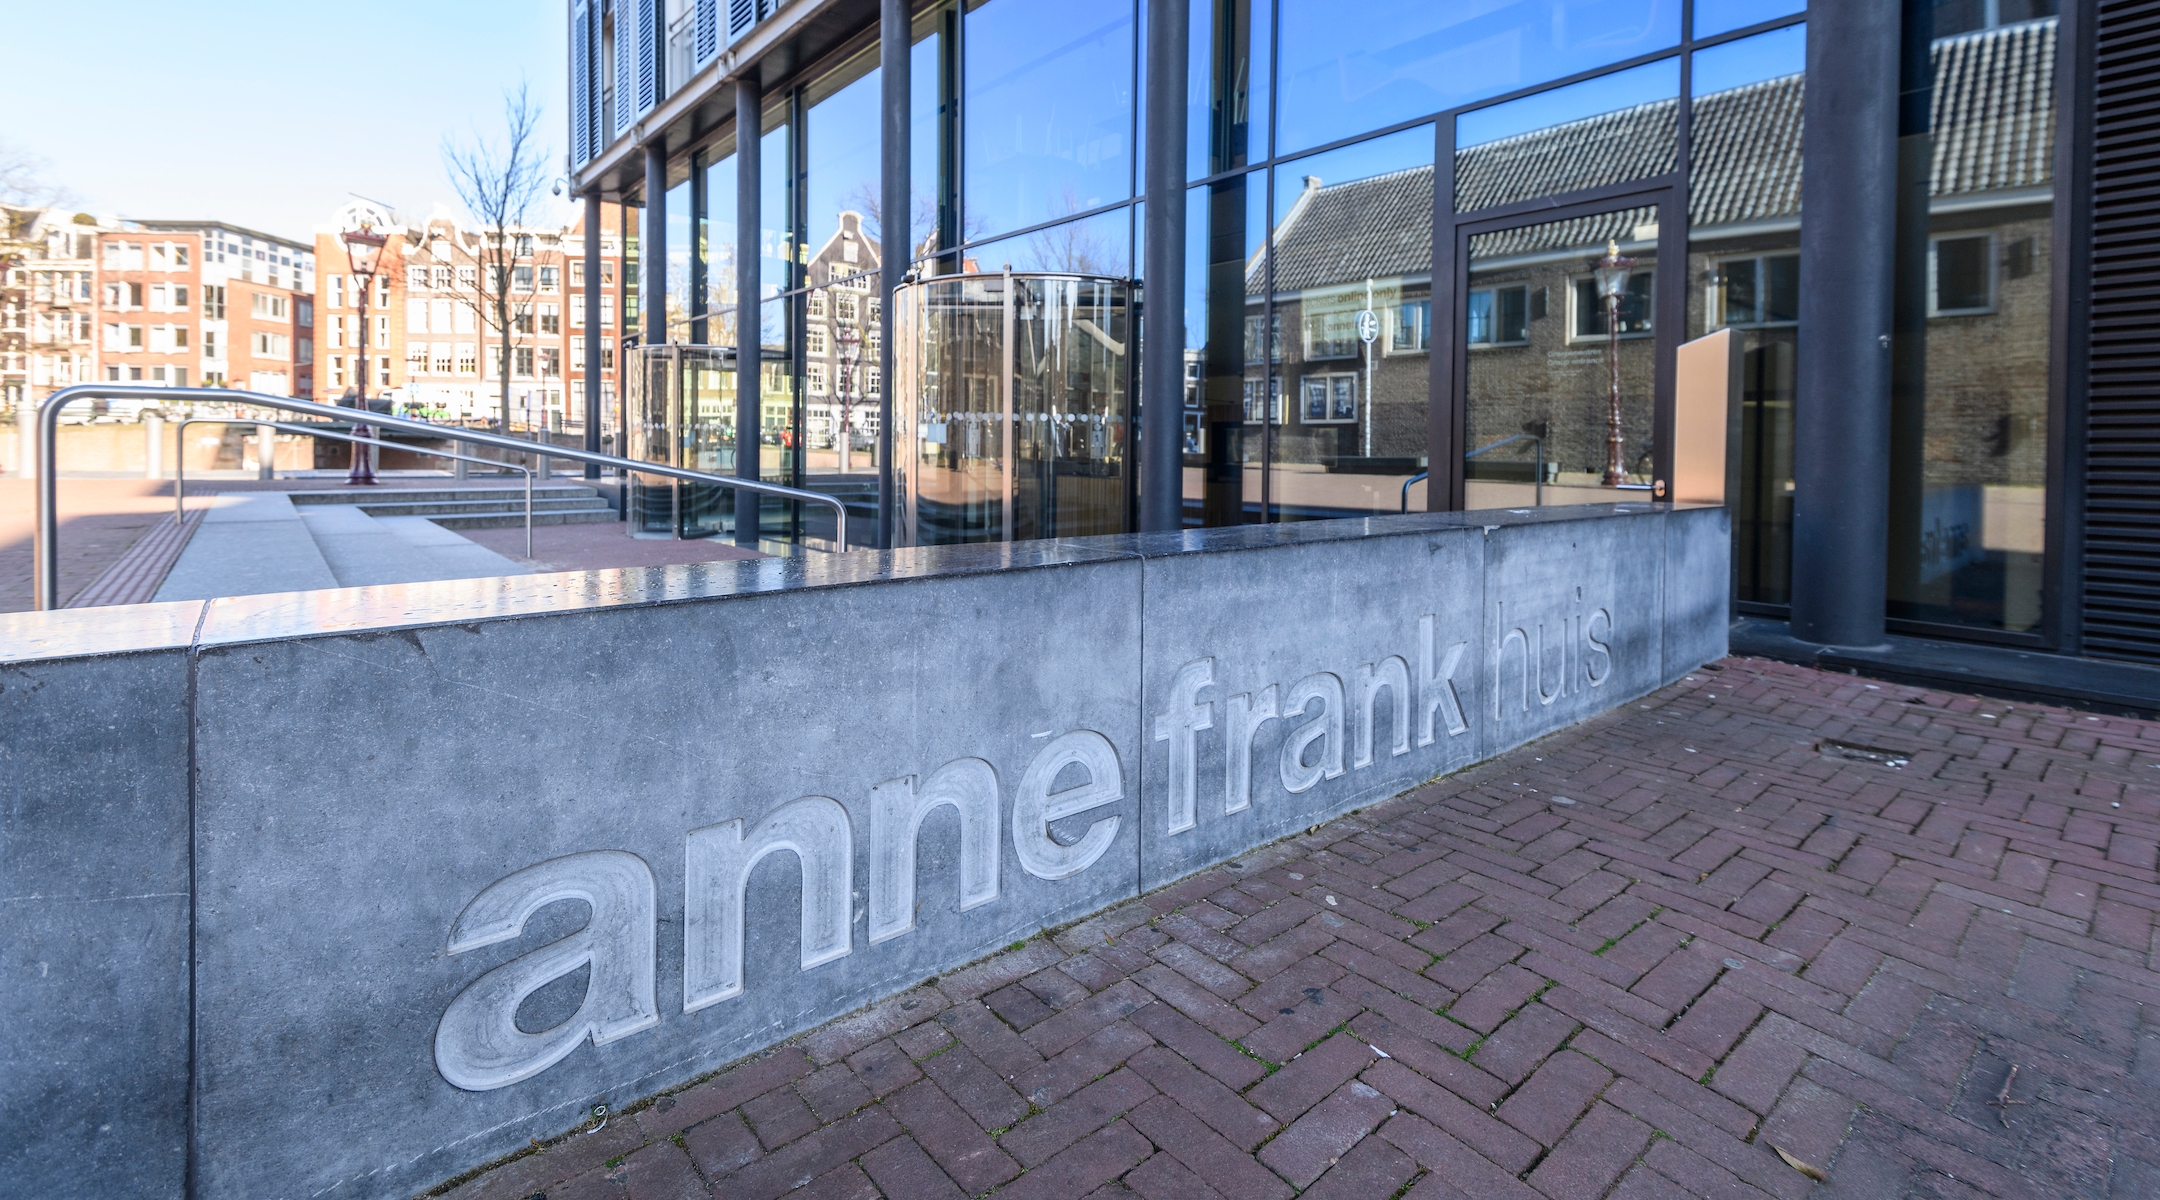 A view outside the Anne Frank House Museum in Amsterdam, March 31, 2020. (Sjoerd van der Wal/Getty Images)